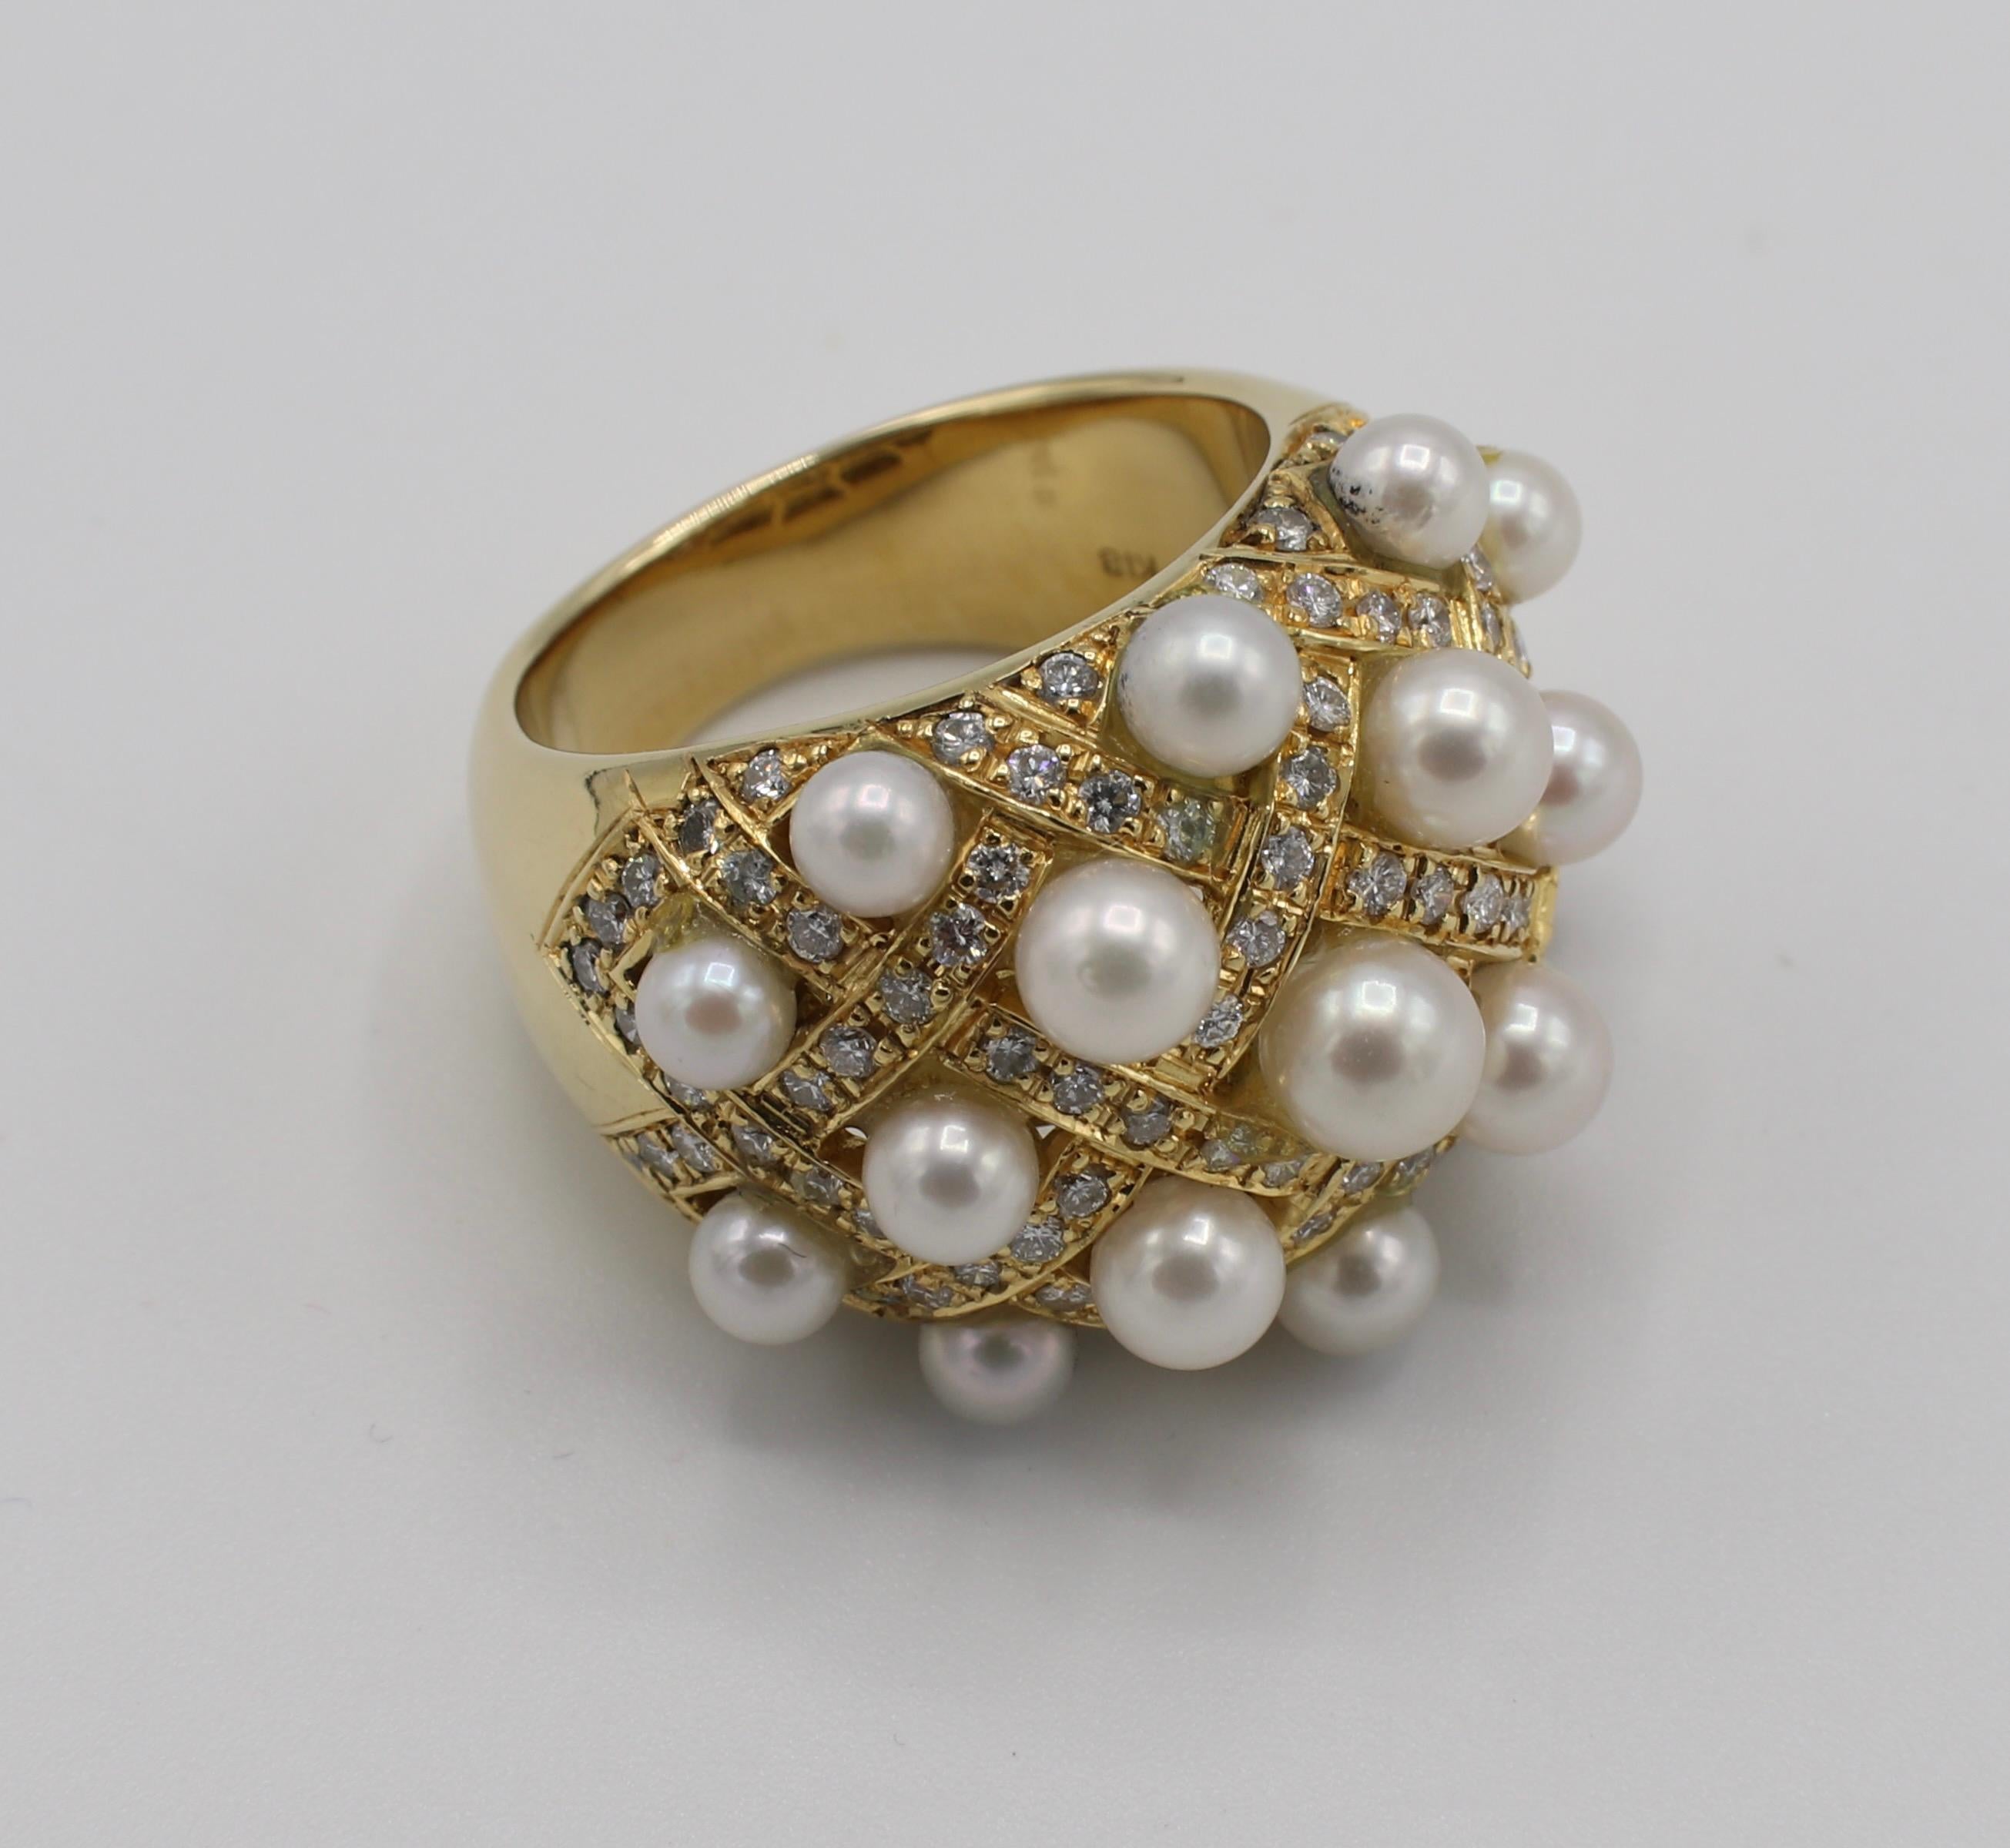 18K Yellow Gold Pearl & Diamond Woven Cocktail Ring Size 6
Metal: 18K yellow gold
Weight: 16.43 grams
Diamonds: 0.86 CTW G VG round brilliant cut diamonds 
Size: 6 (US)
Top of ring is 16.5mm wide
Bottom of ring is 5mm wide 
